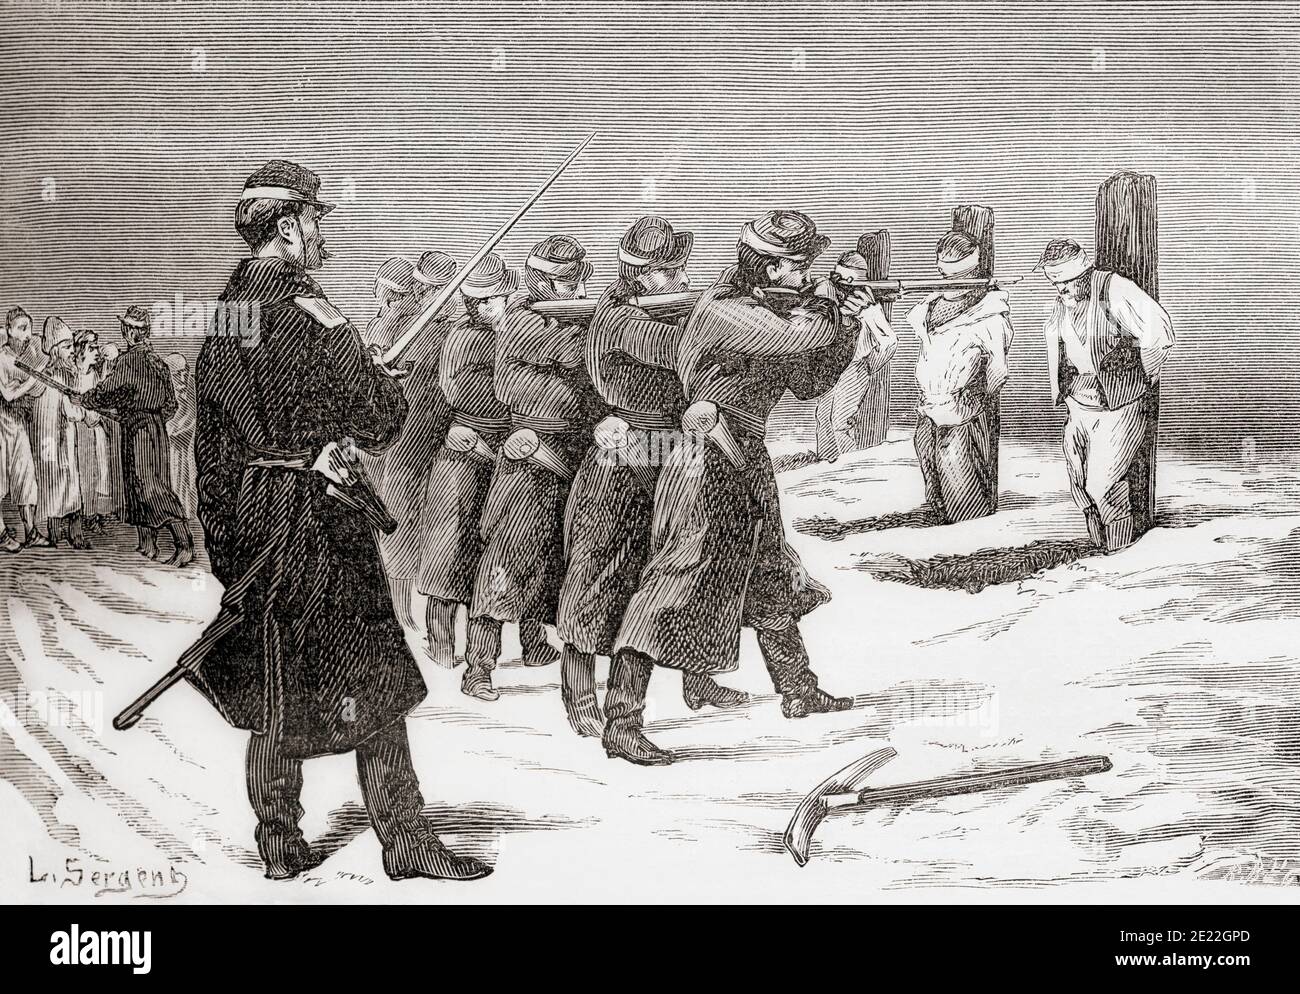 The execution of a group of Bashi-Bazouks, irregular soldiers of the Ottoman army, by Russian soldiers during the Russo-Turkish War (1877–1878).  From Russes et Turcs, La Guerre D'Orient, published 1878 Stock Photo